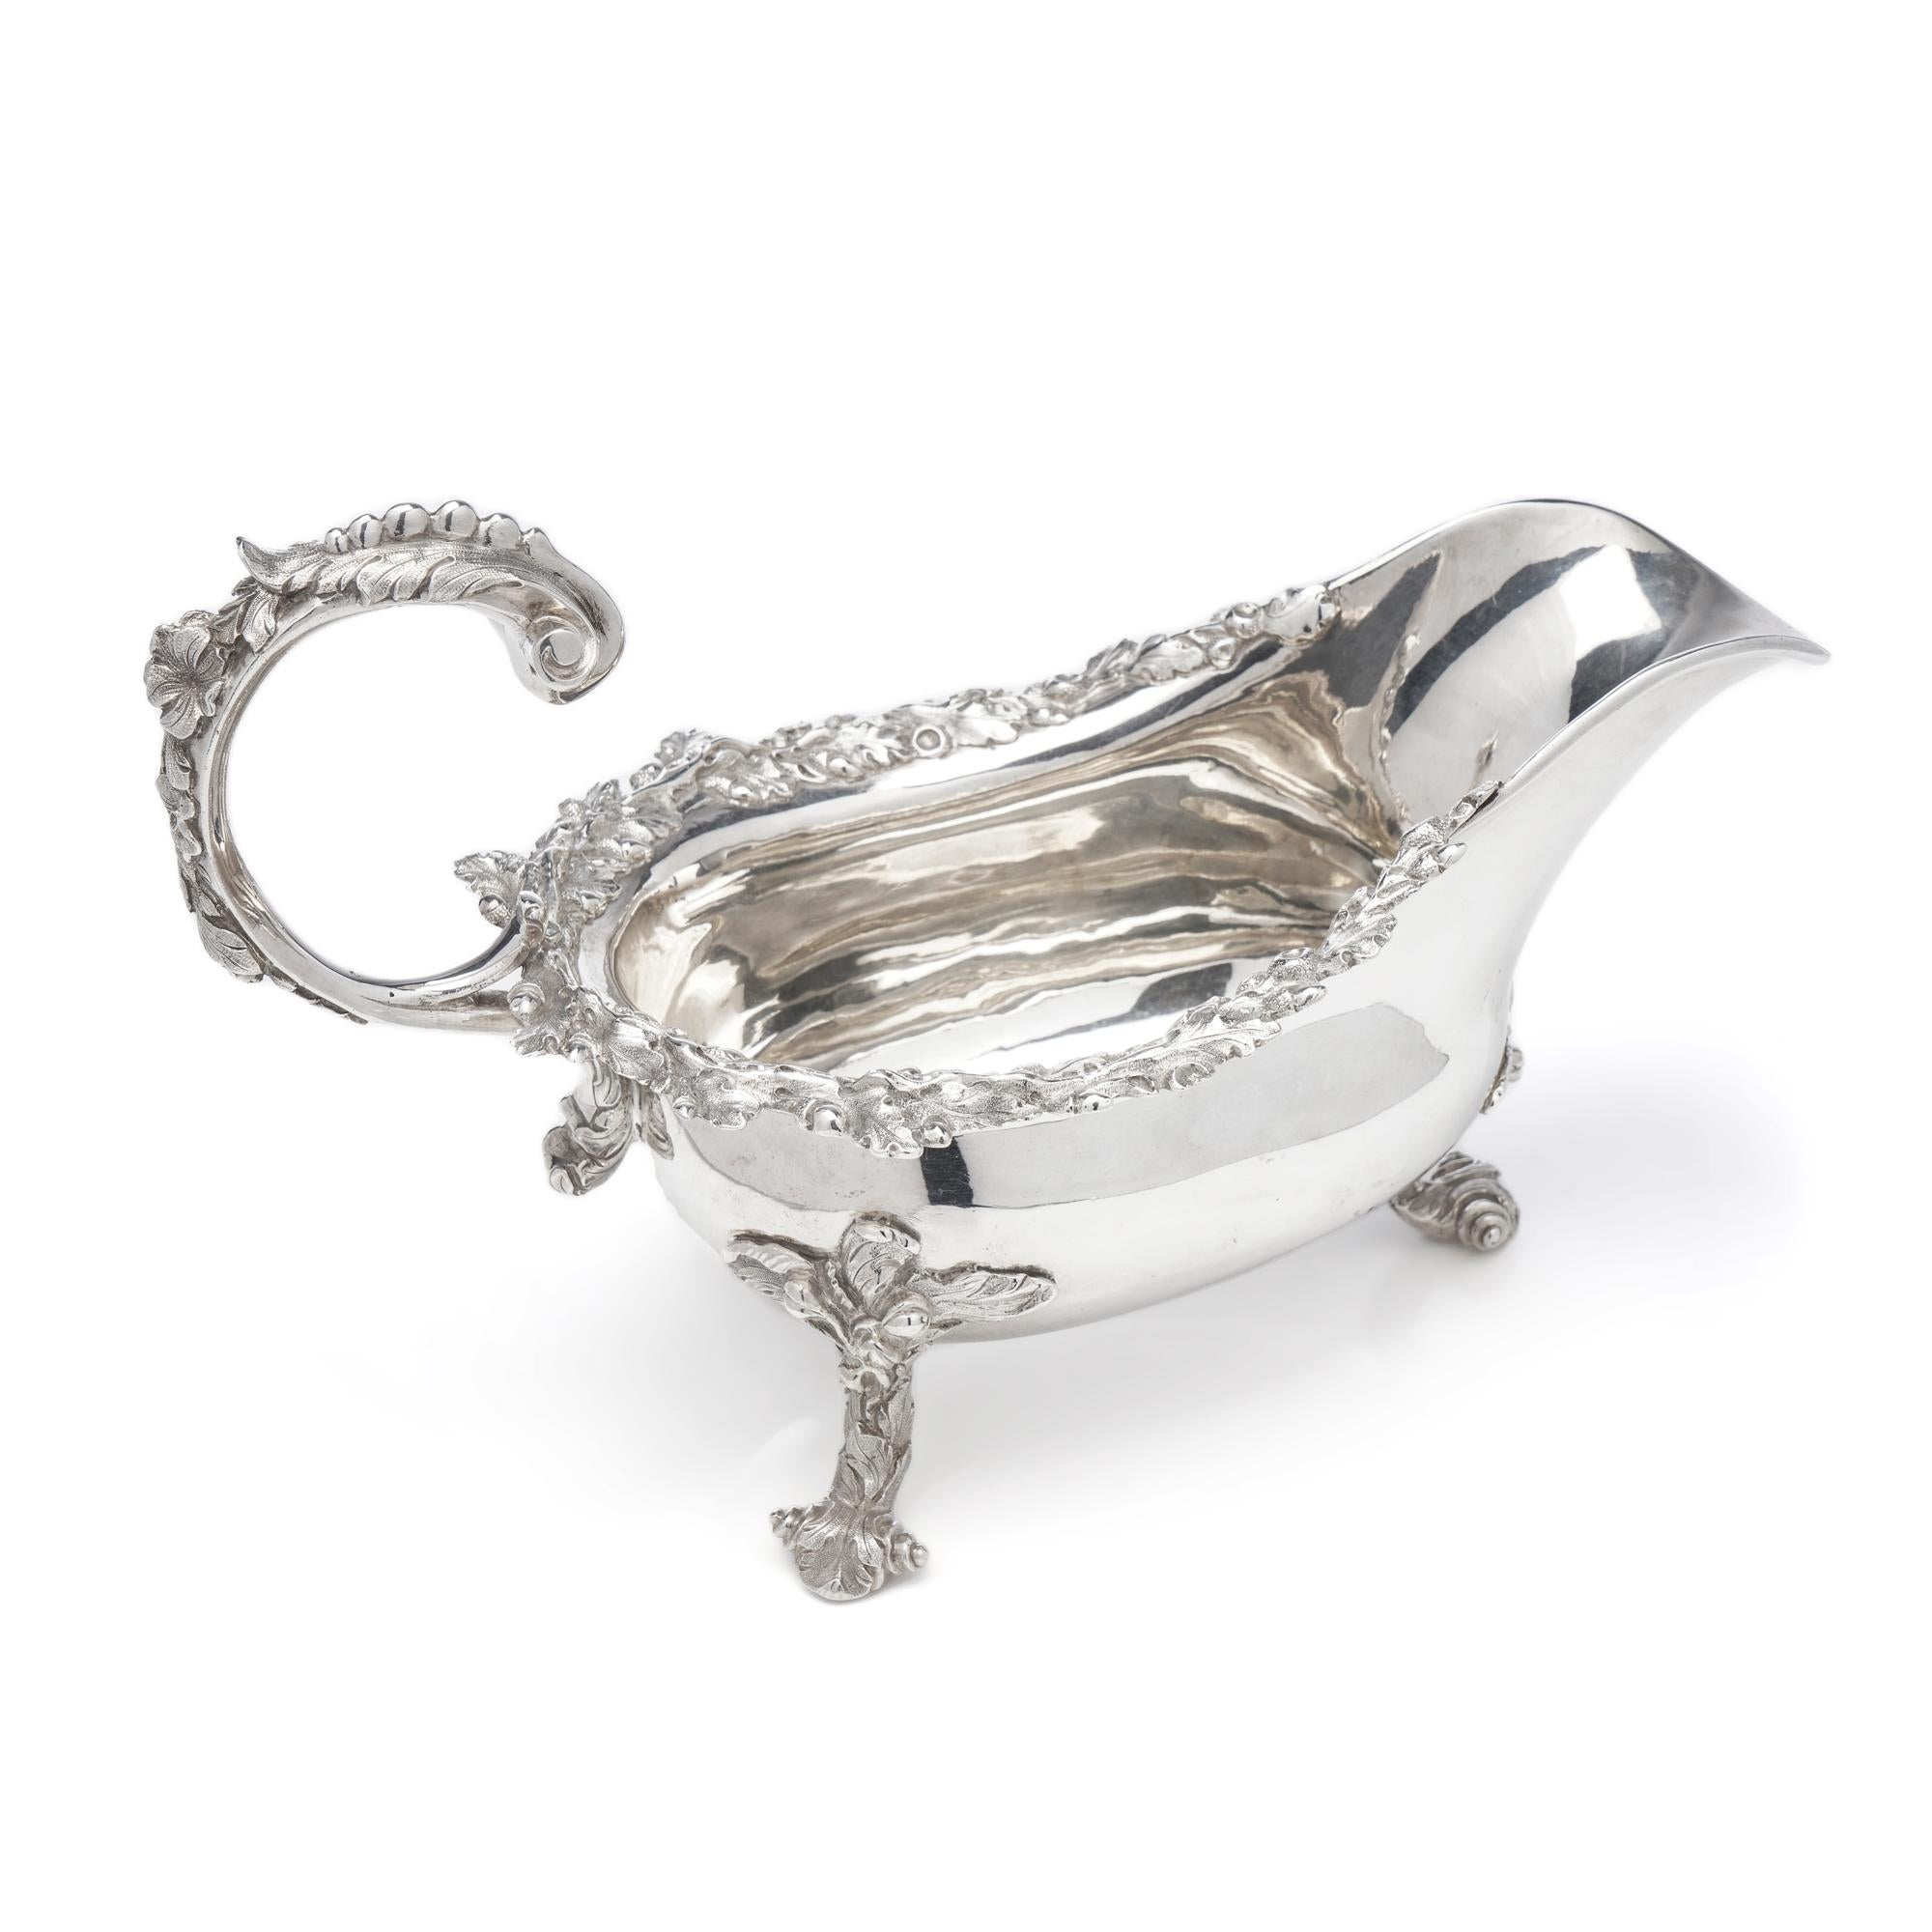 British Georgian Sterling Silver Chased Sauce Boat, James Arthur, London, 1827 For Sale